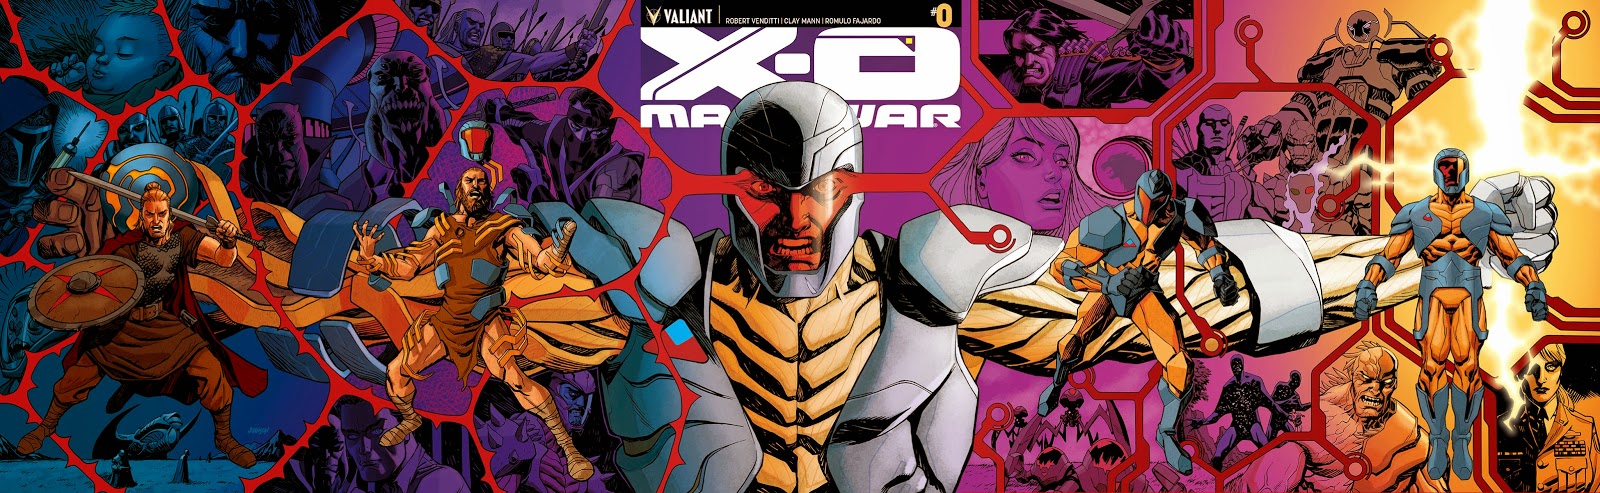 Valients X-O MANOWAR #0 Preview cover art